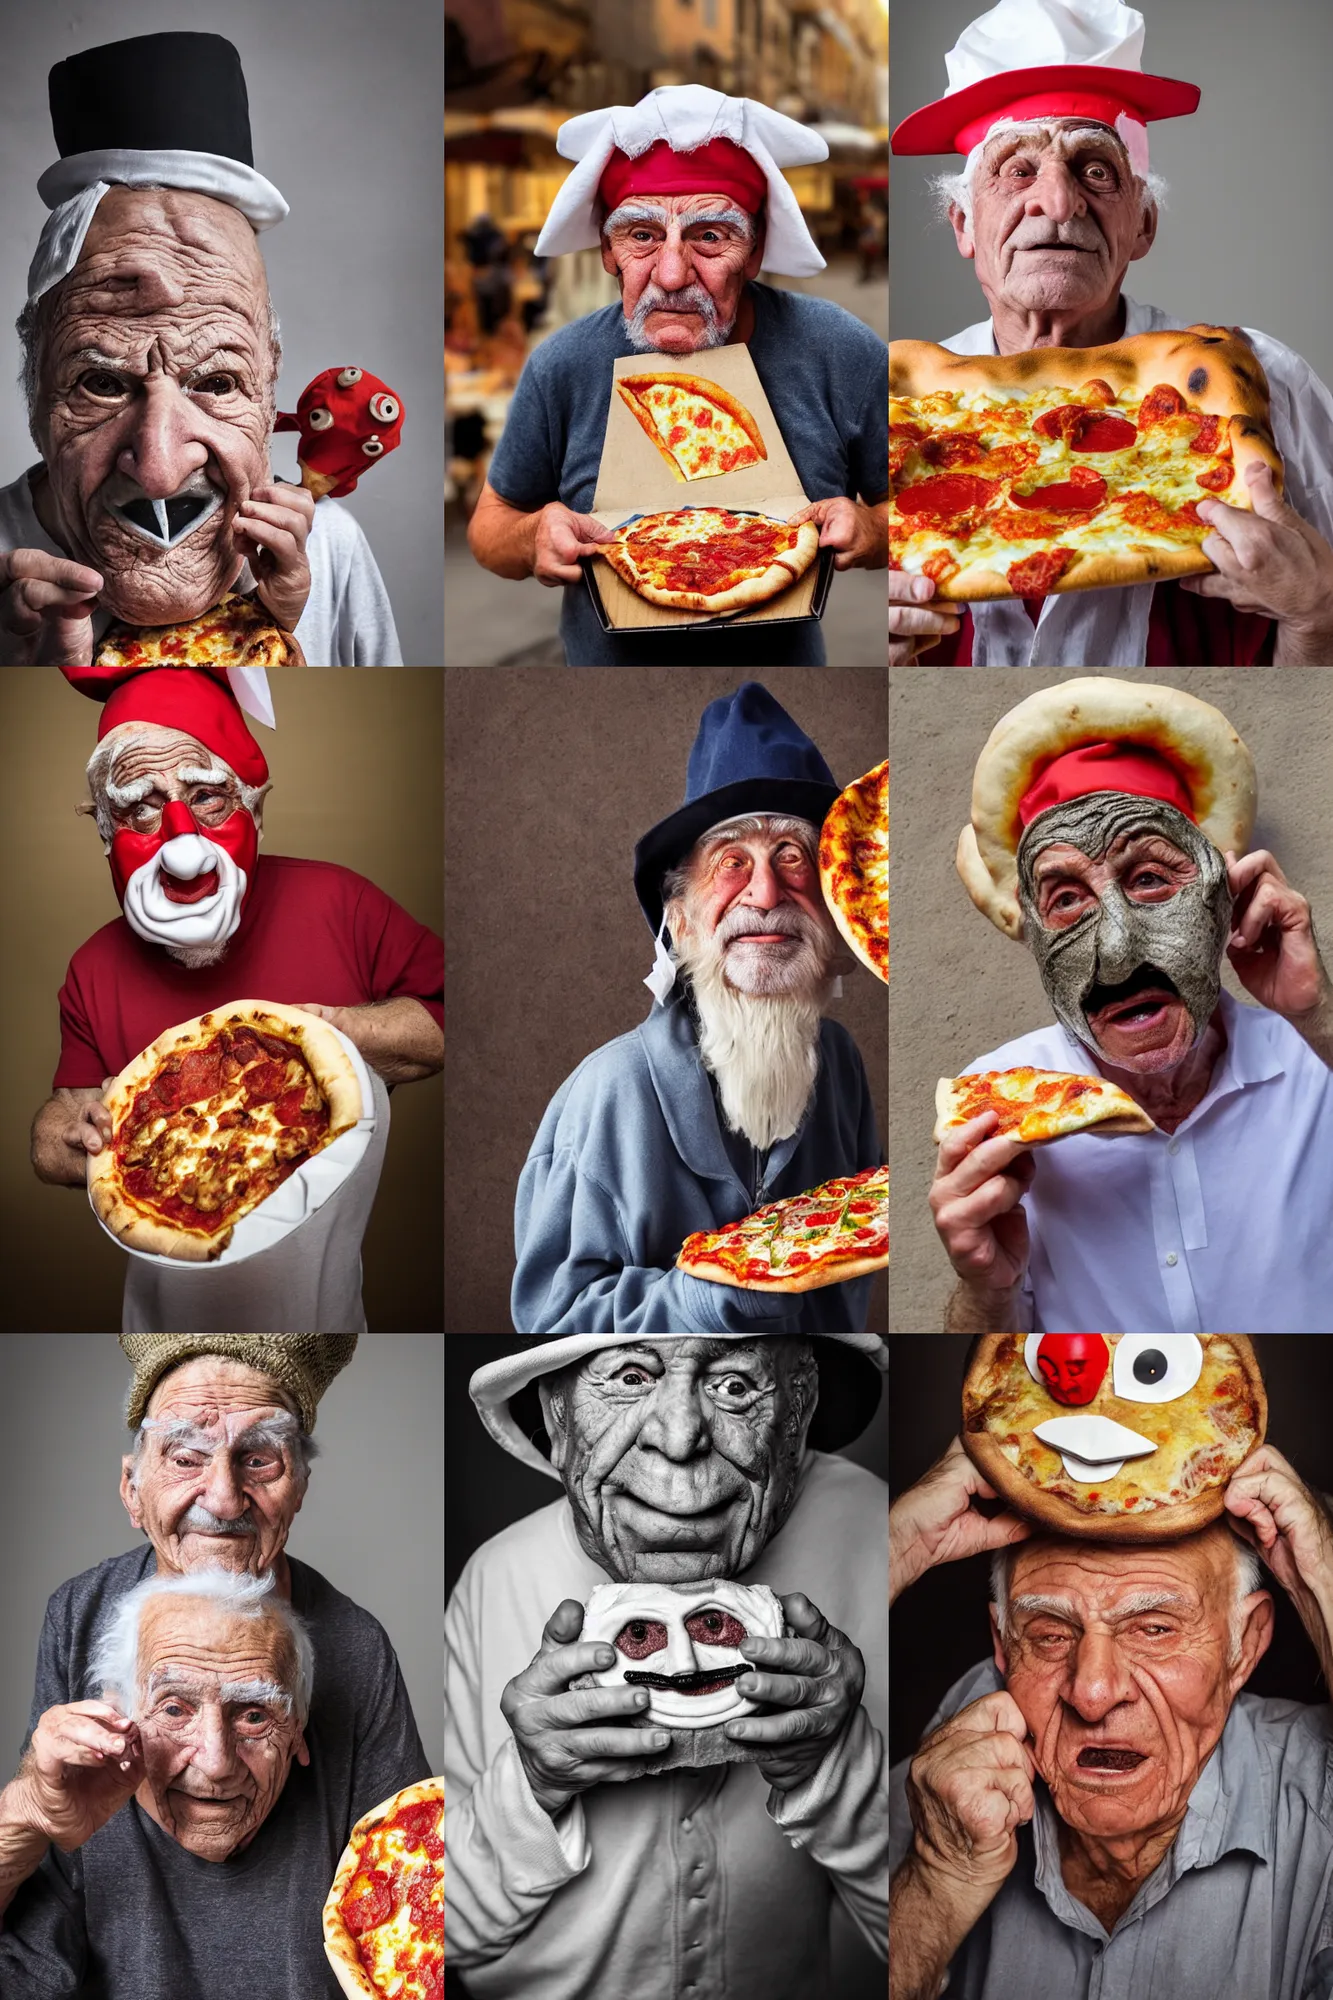 Prompt: close - up portrait of a wrinkled old man wearing a pulcinella mask holding up a pizza!! to behold, clear eyes looking into camera, baggy clothing and hat, masterpiece photo by paola agosti